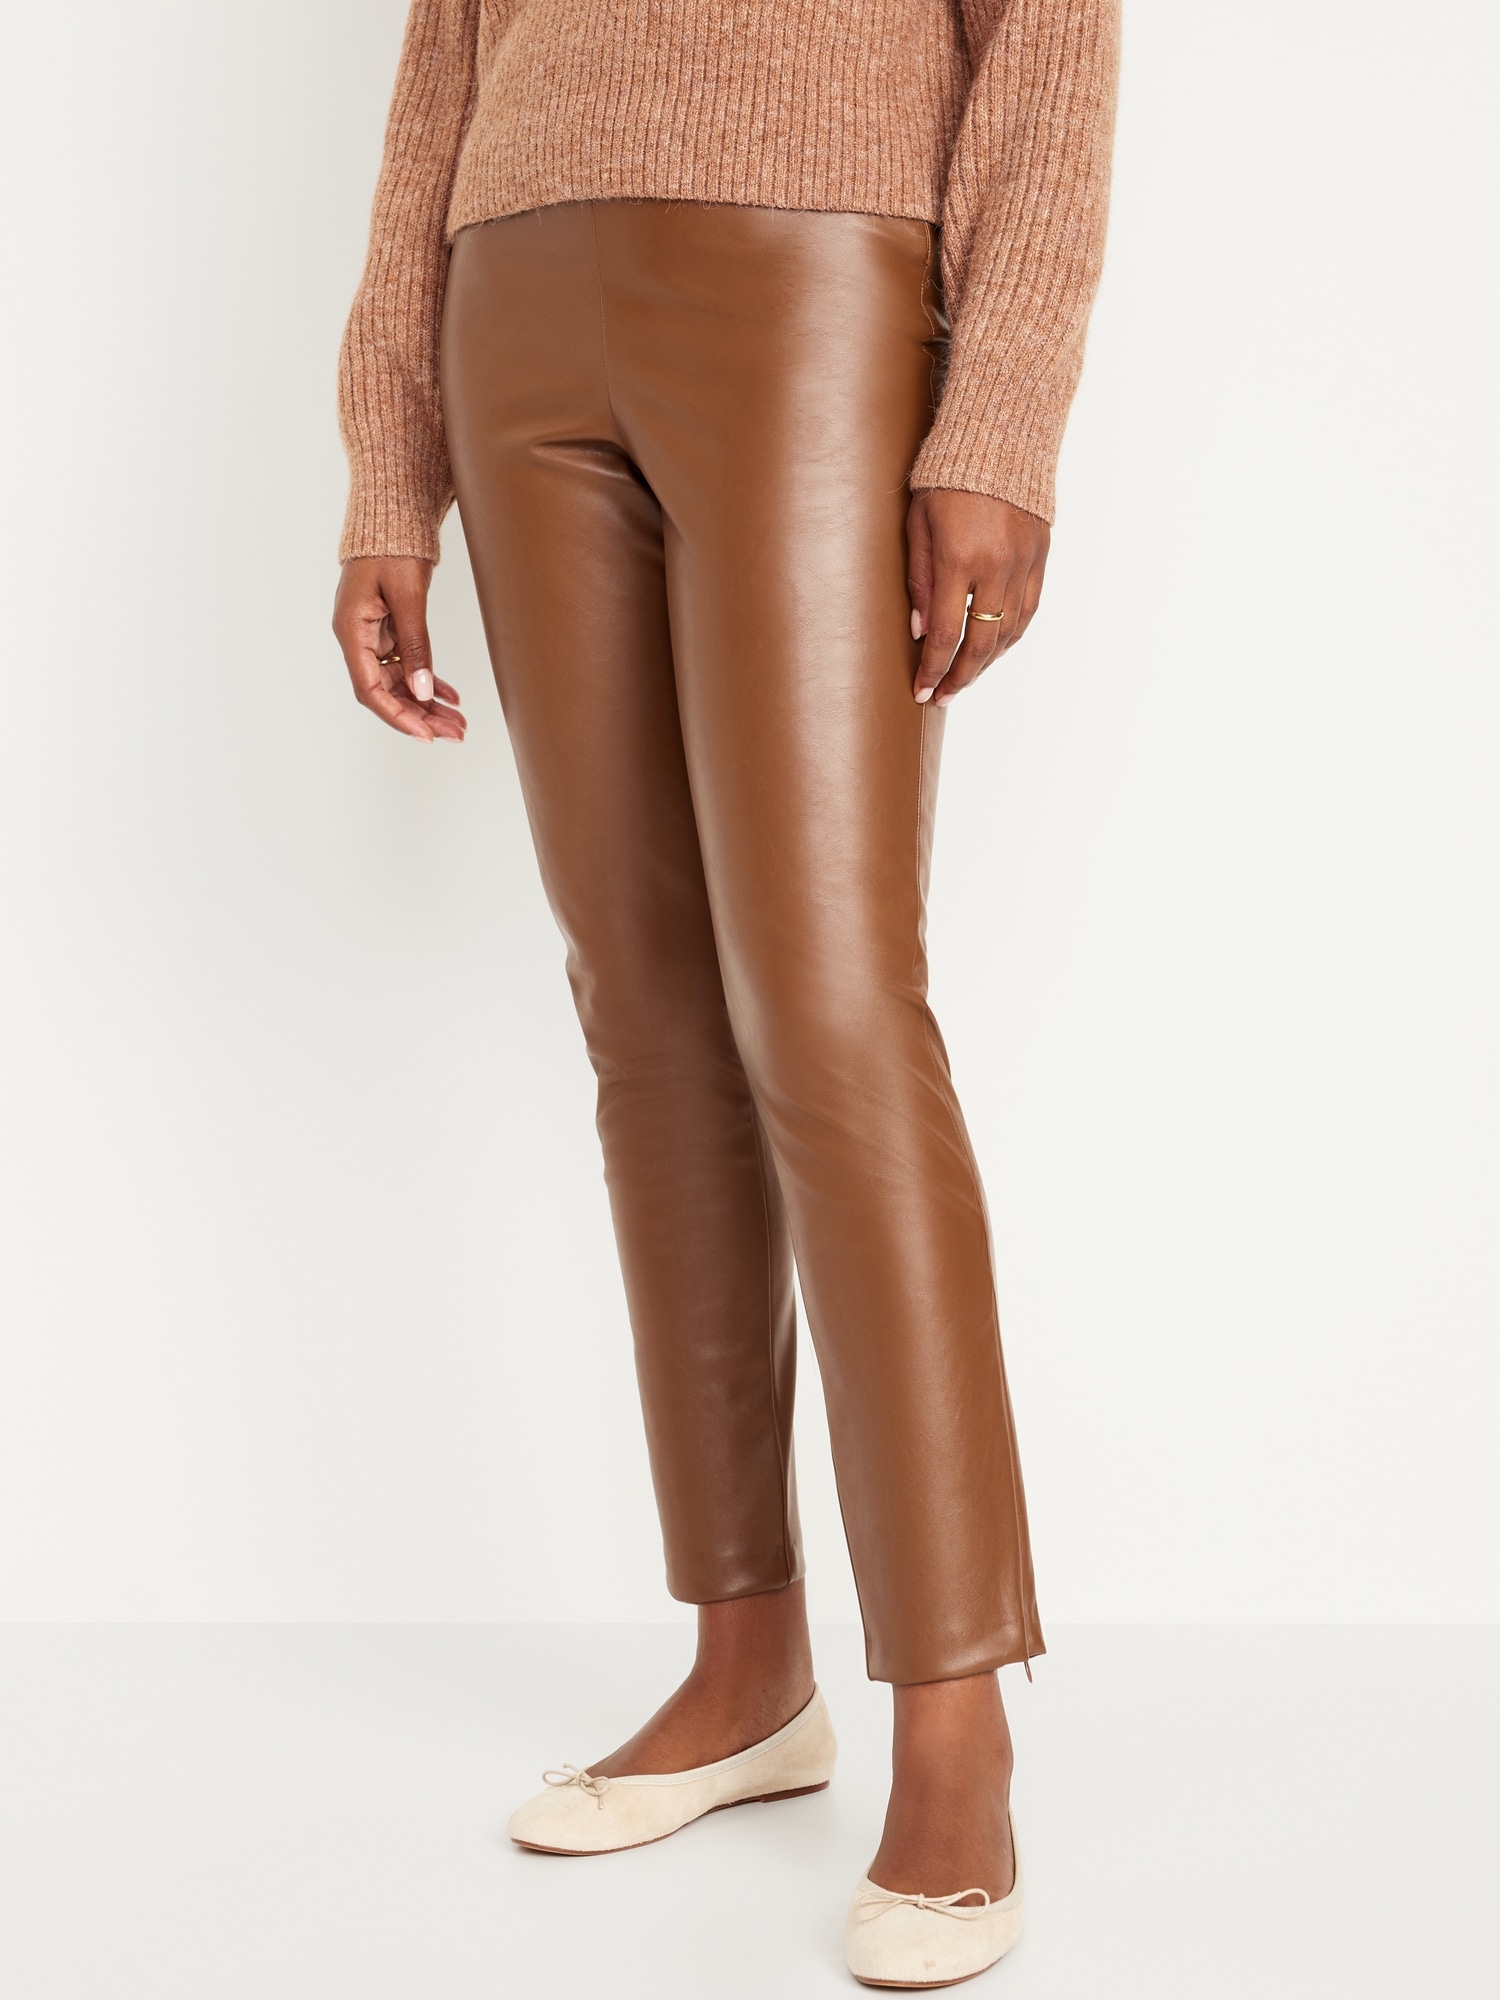 Extra High-Waisted Faux Leather Pants for Women | Old Navy